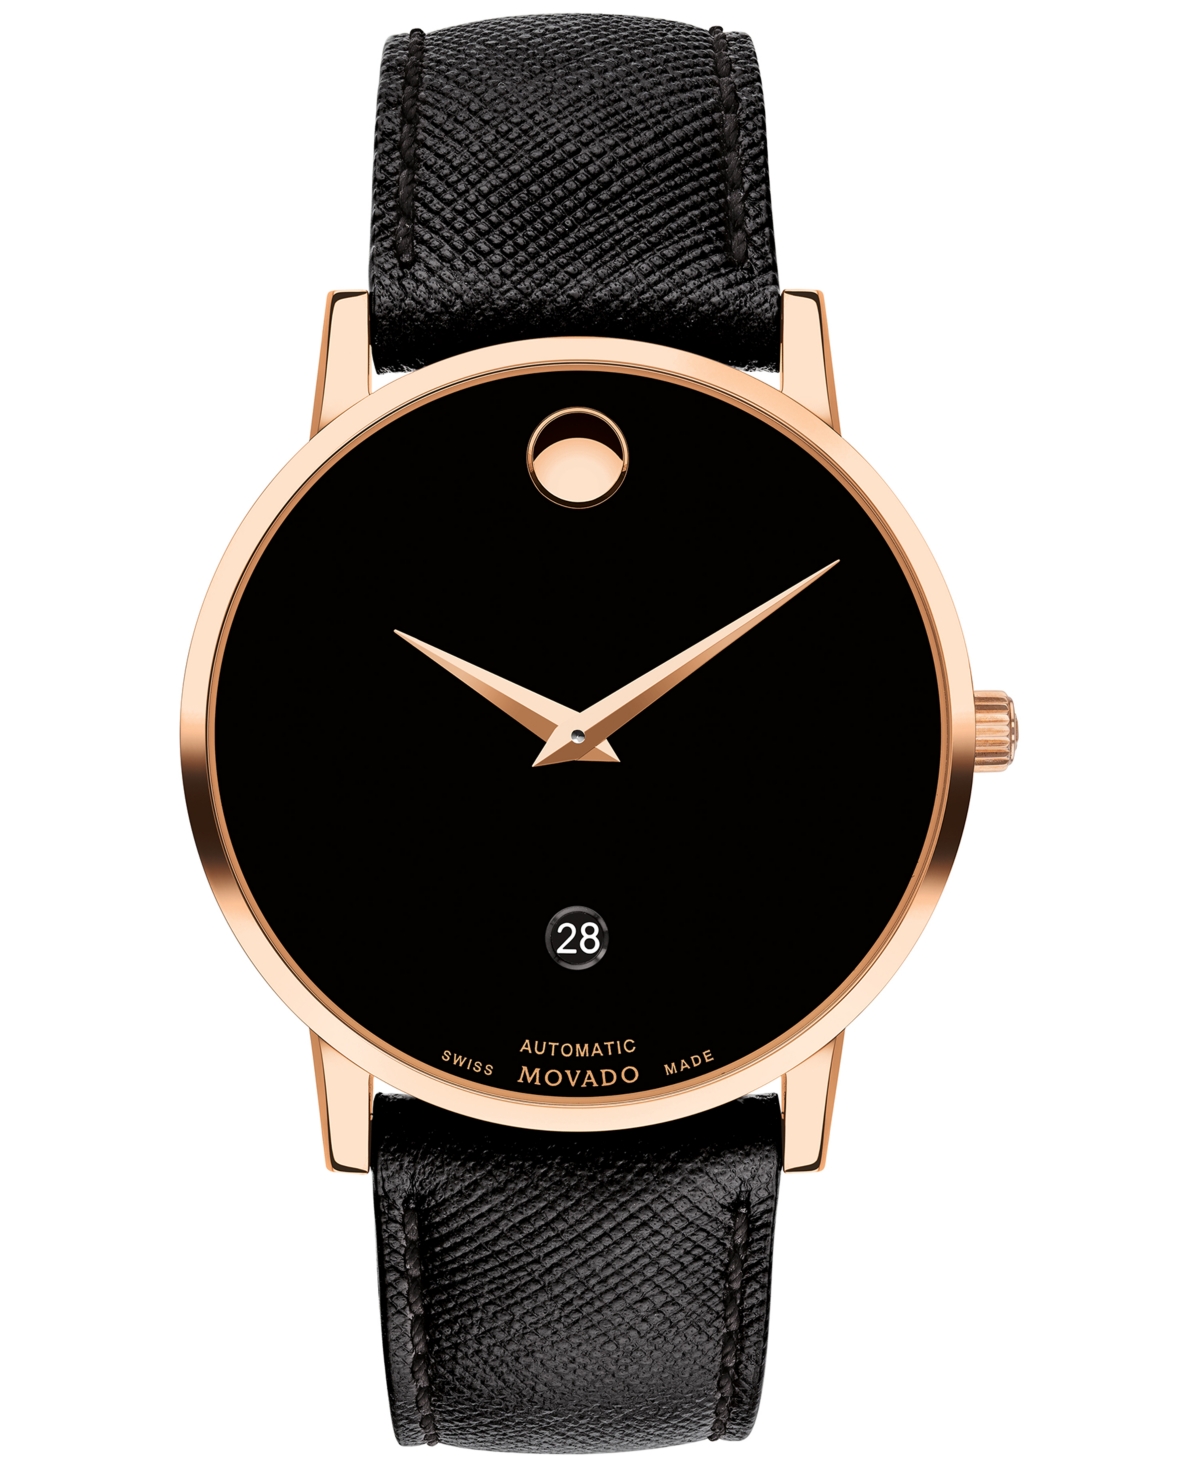 Movado Men's Swiss Automatic Museum Black Calfskin Strap Watch 40mm In Rose Gold